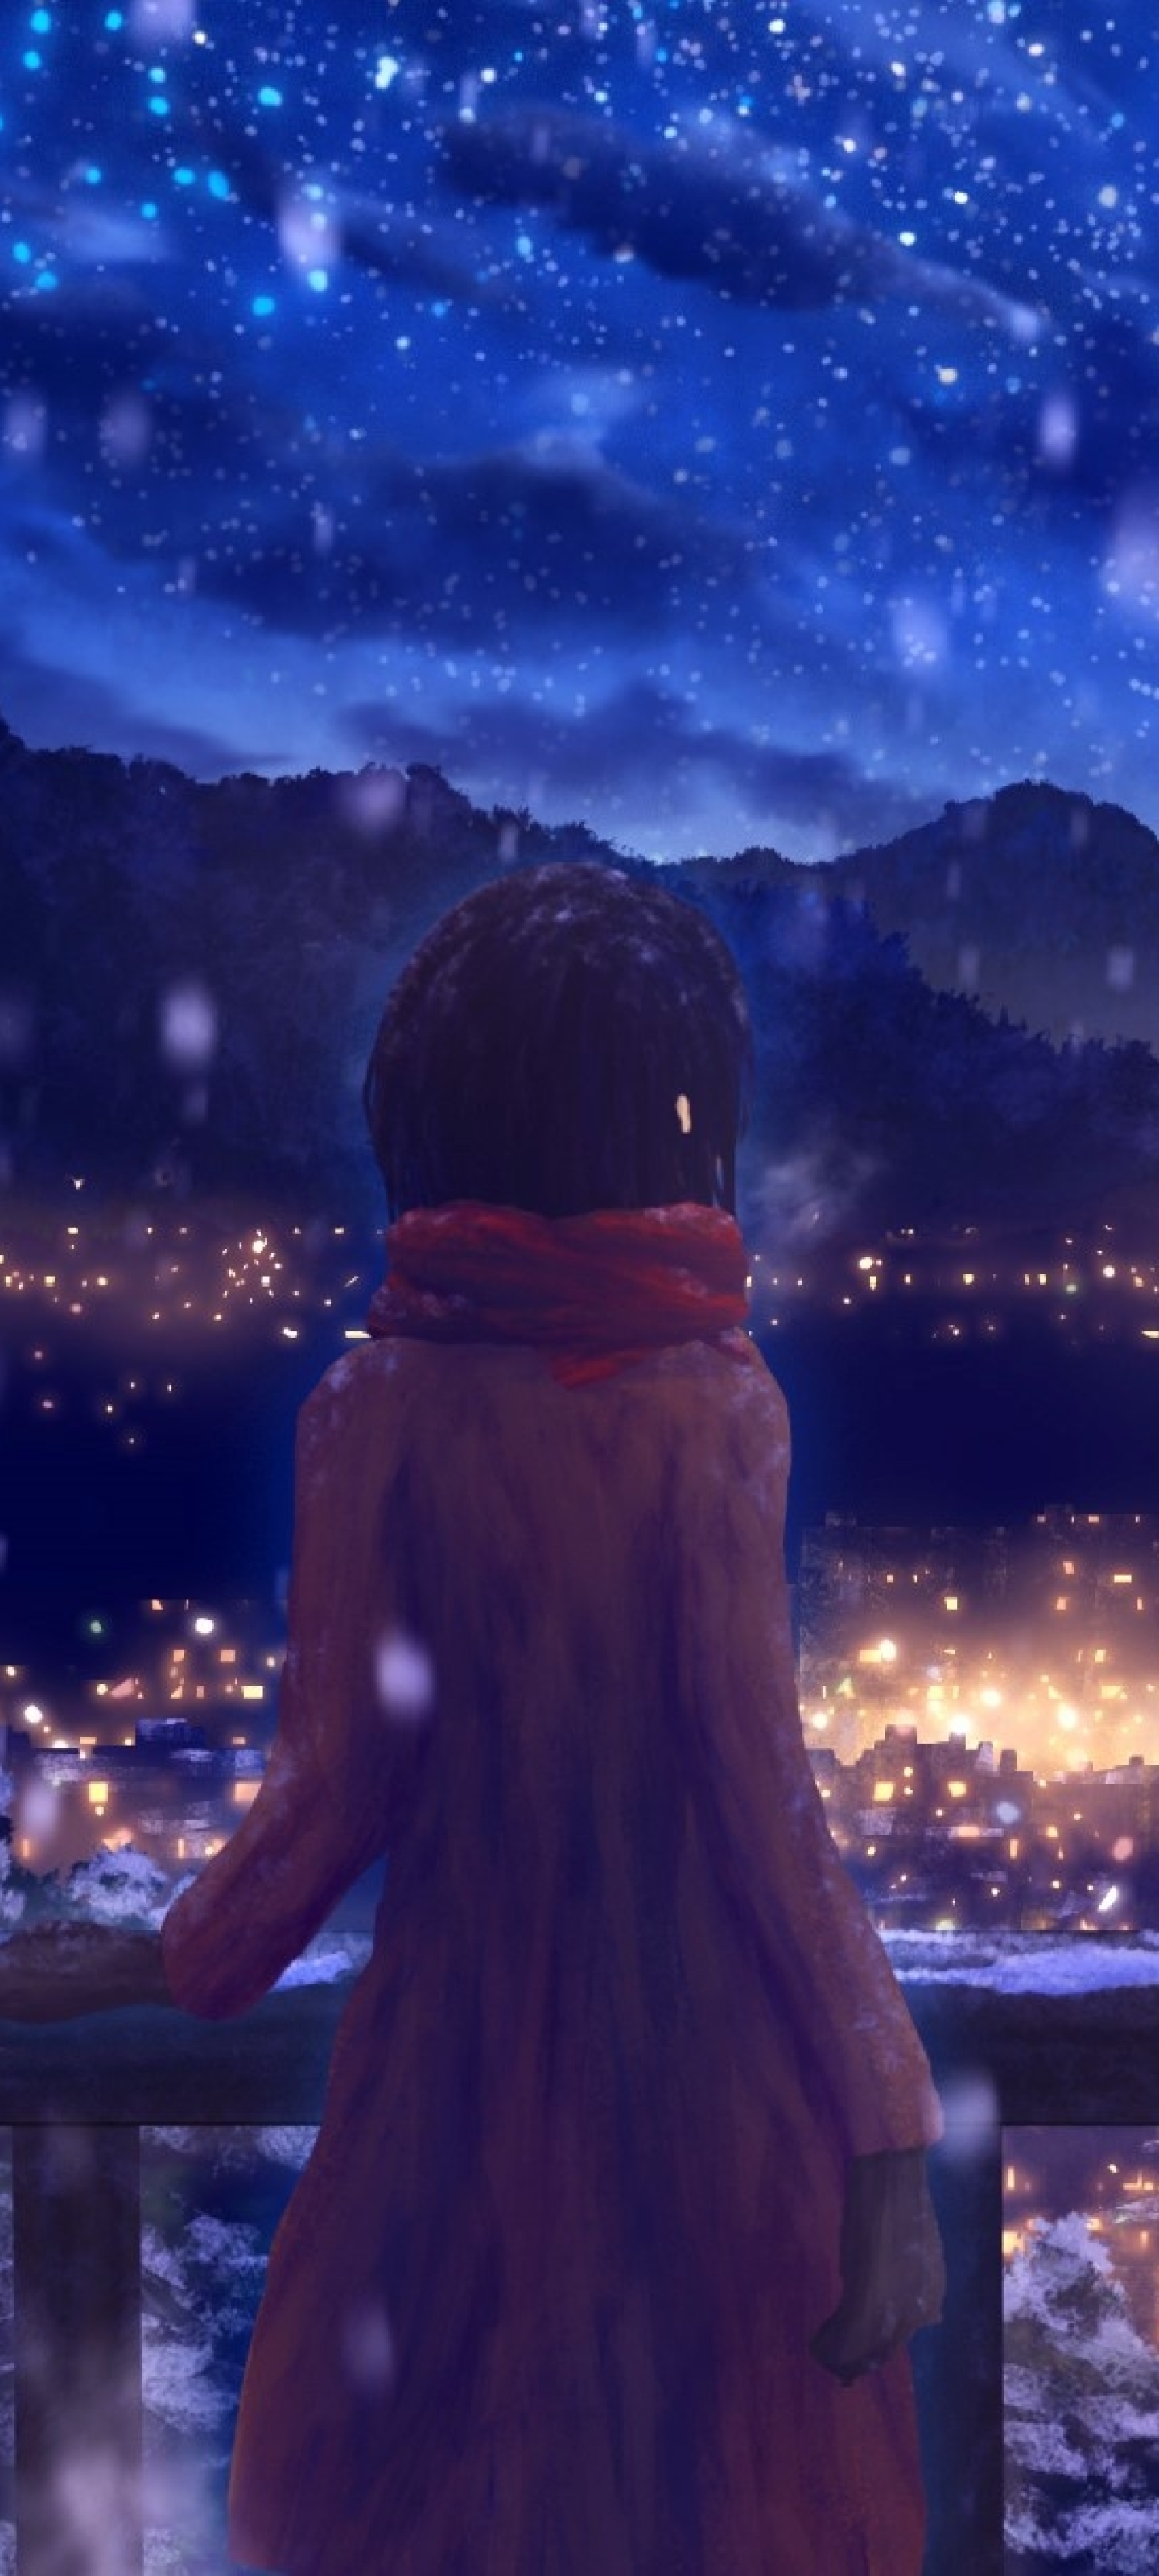 1440x3200 Anime Girl Standing Alone in Snow 1440x3200 ...